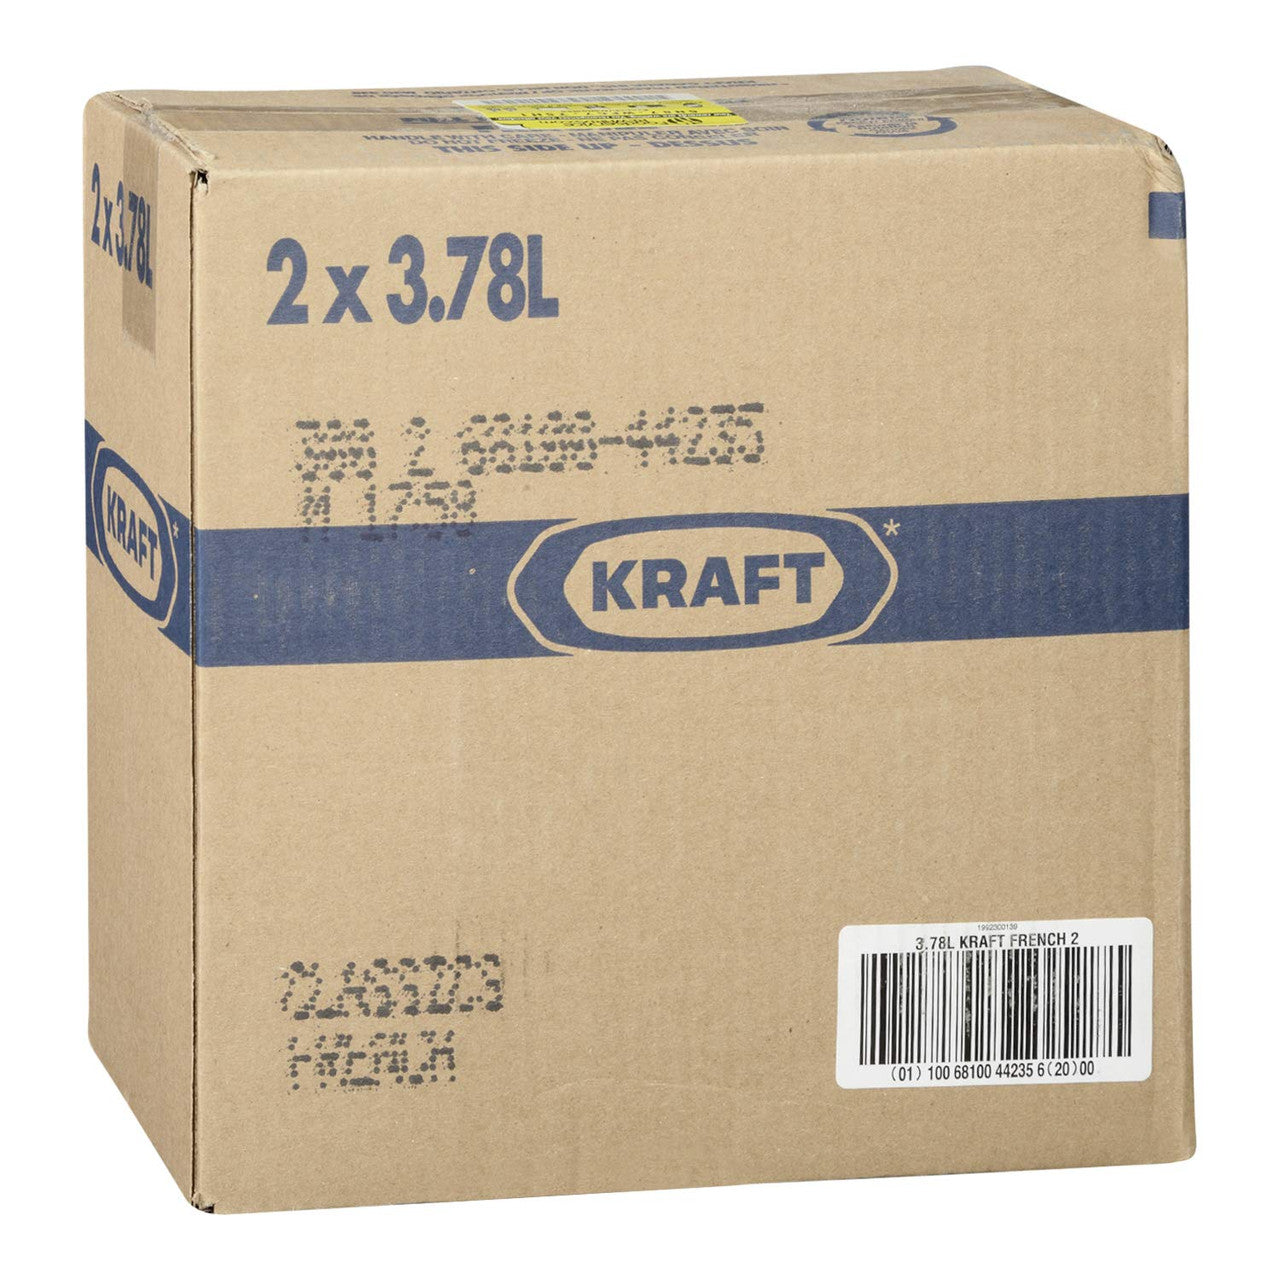 Kraft French Salad Dressing, 3.78L/1 Gallon per jug (2pk), {Imported from Canada}